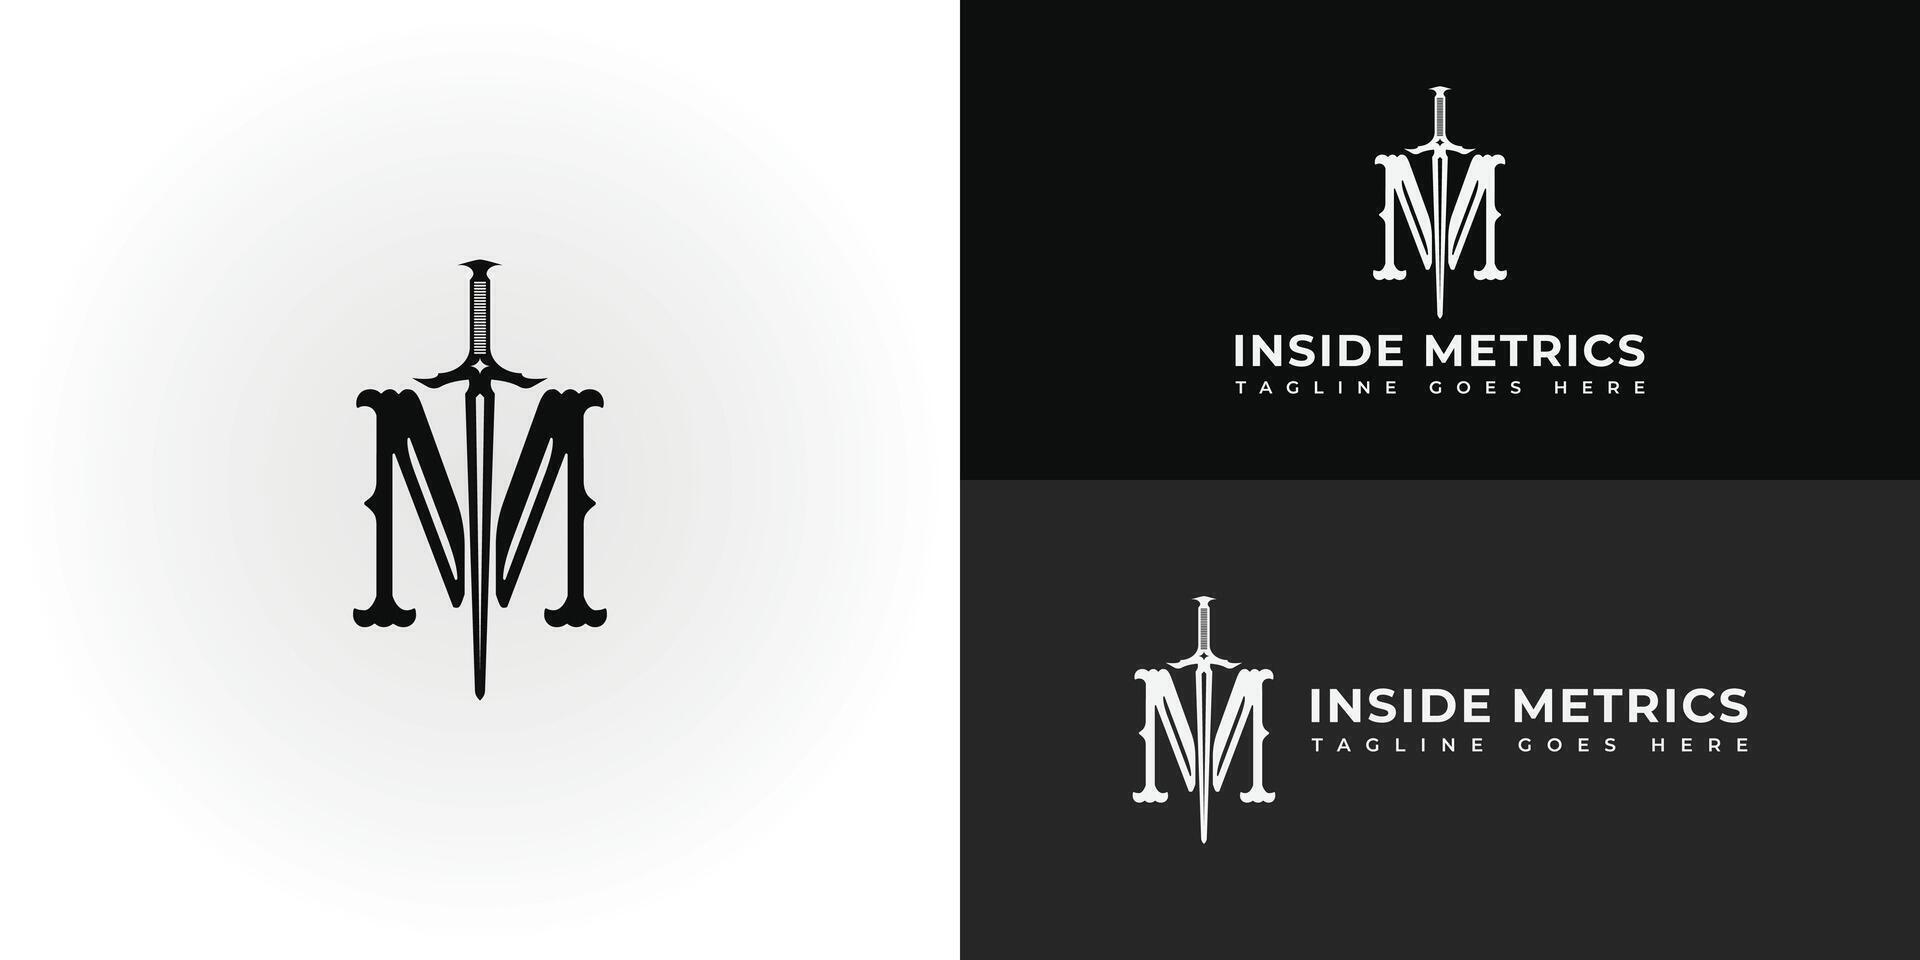 Abstract Letter M and sword logo design inspiration in black color presented with multiple background colors. The logo is suitable for Business and Consulting Company logo design inspiration templates vector